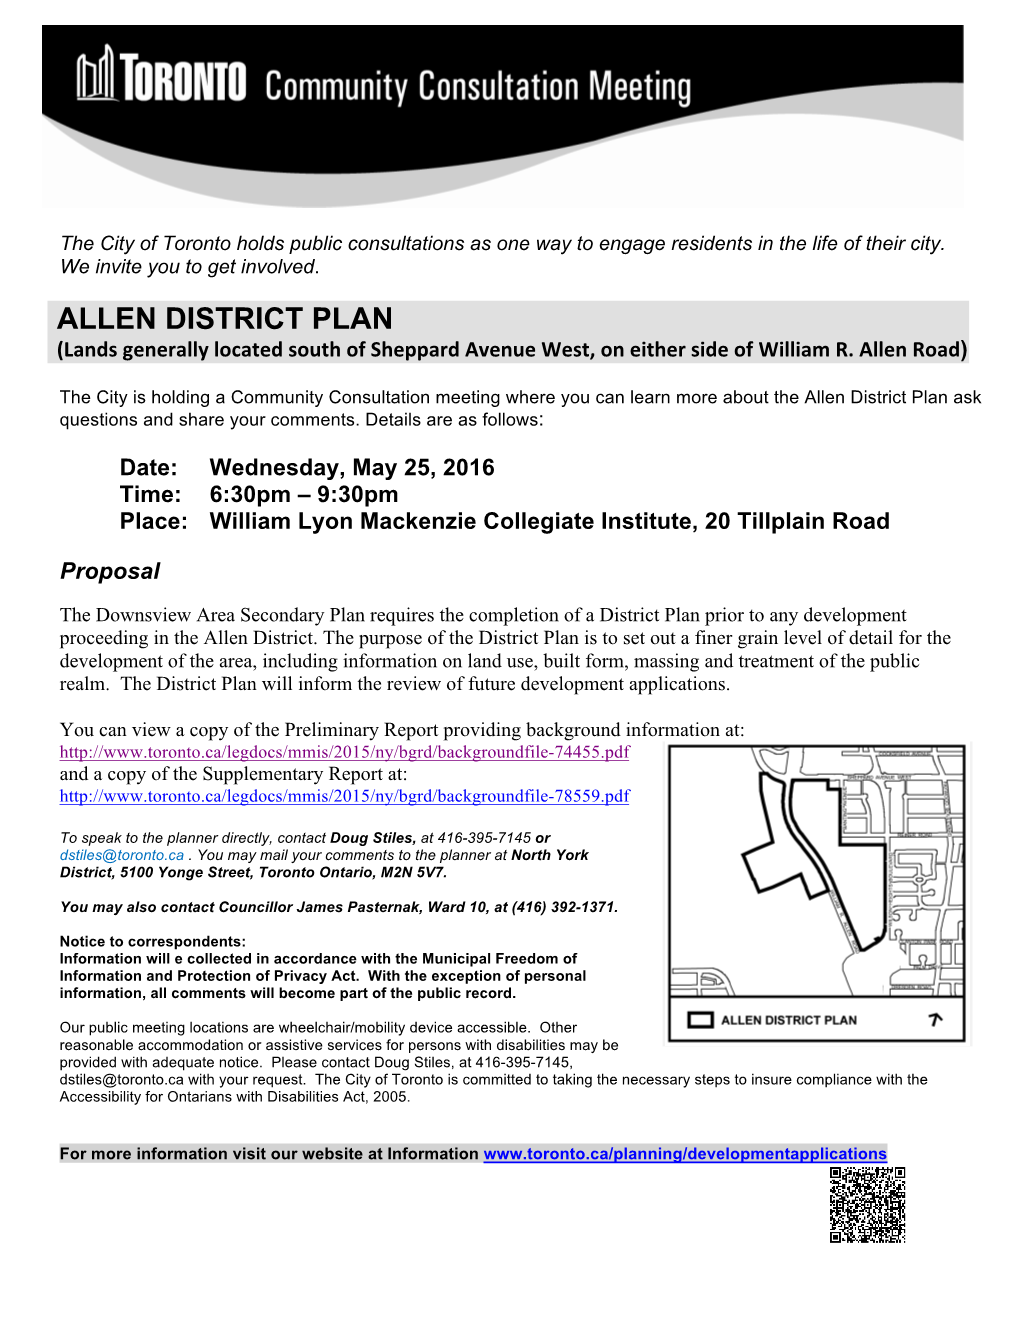 ALLEN DISTRICT PLAN (Lands Generally Located South of Sheppard Avenue West, on Either Side of William R